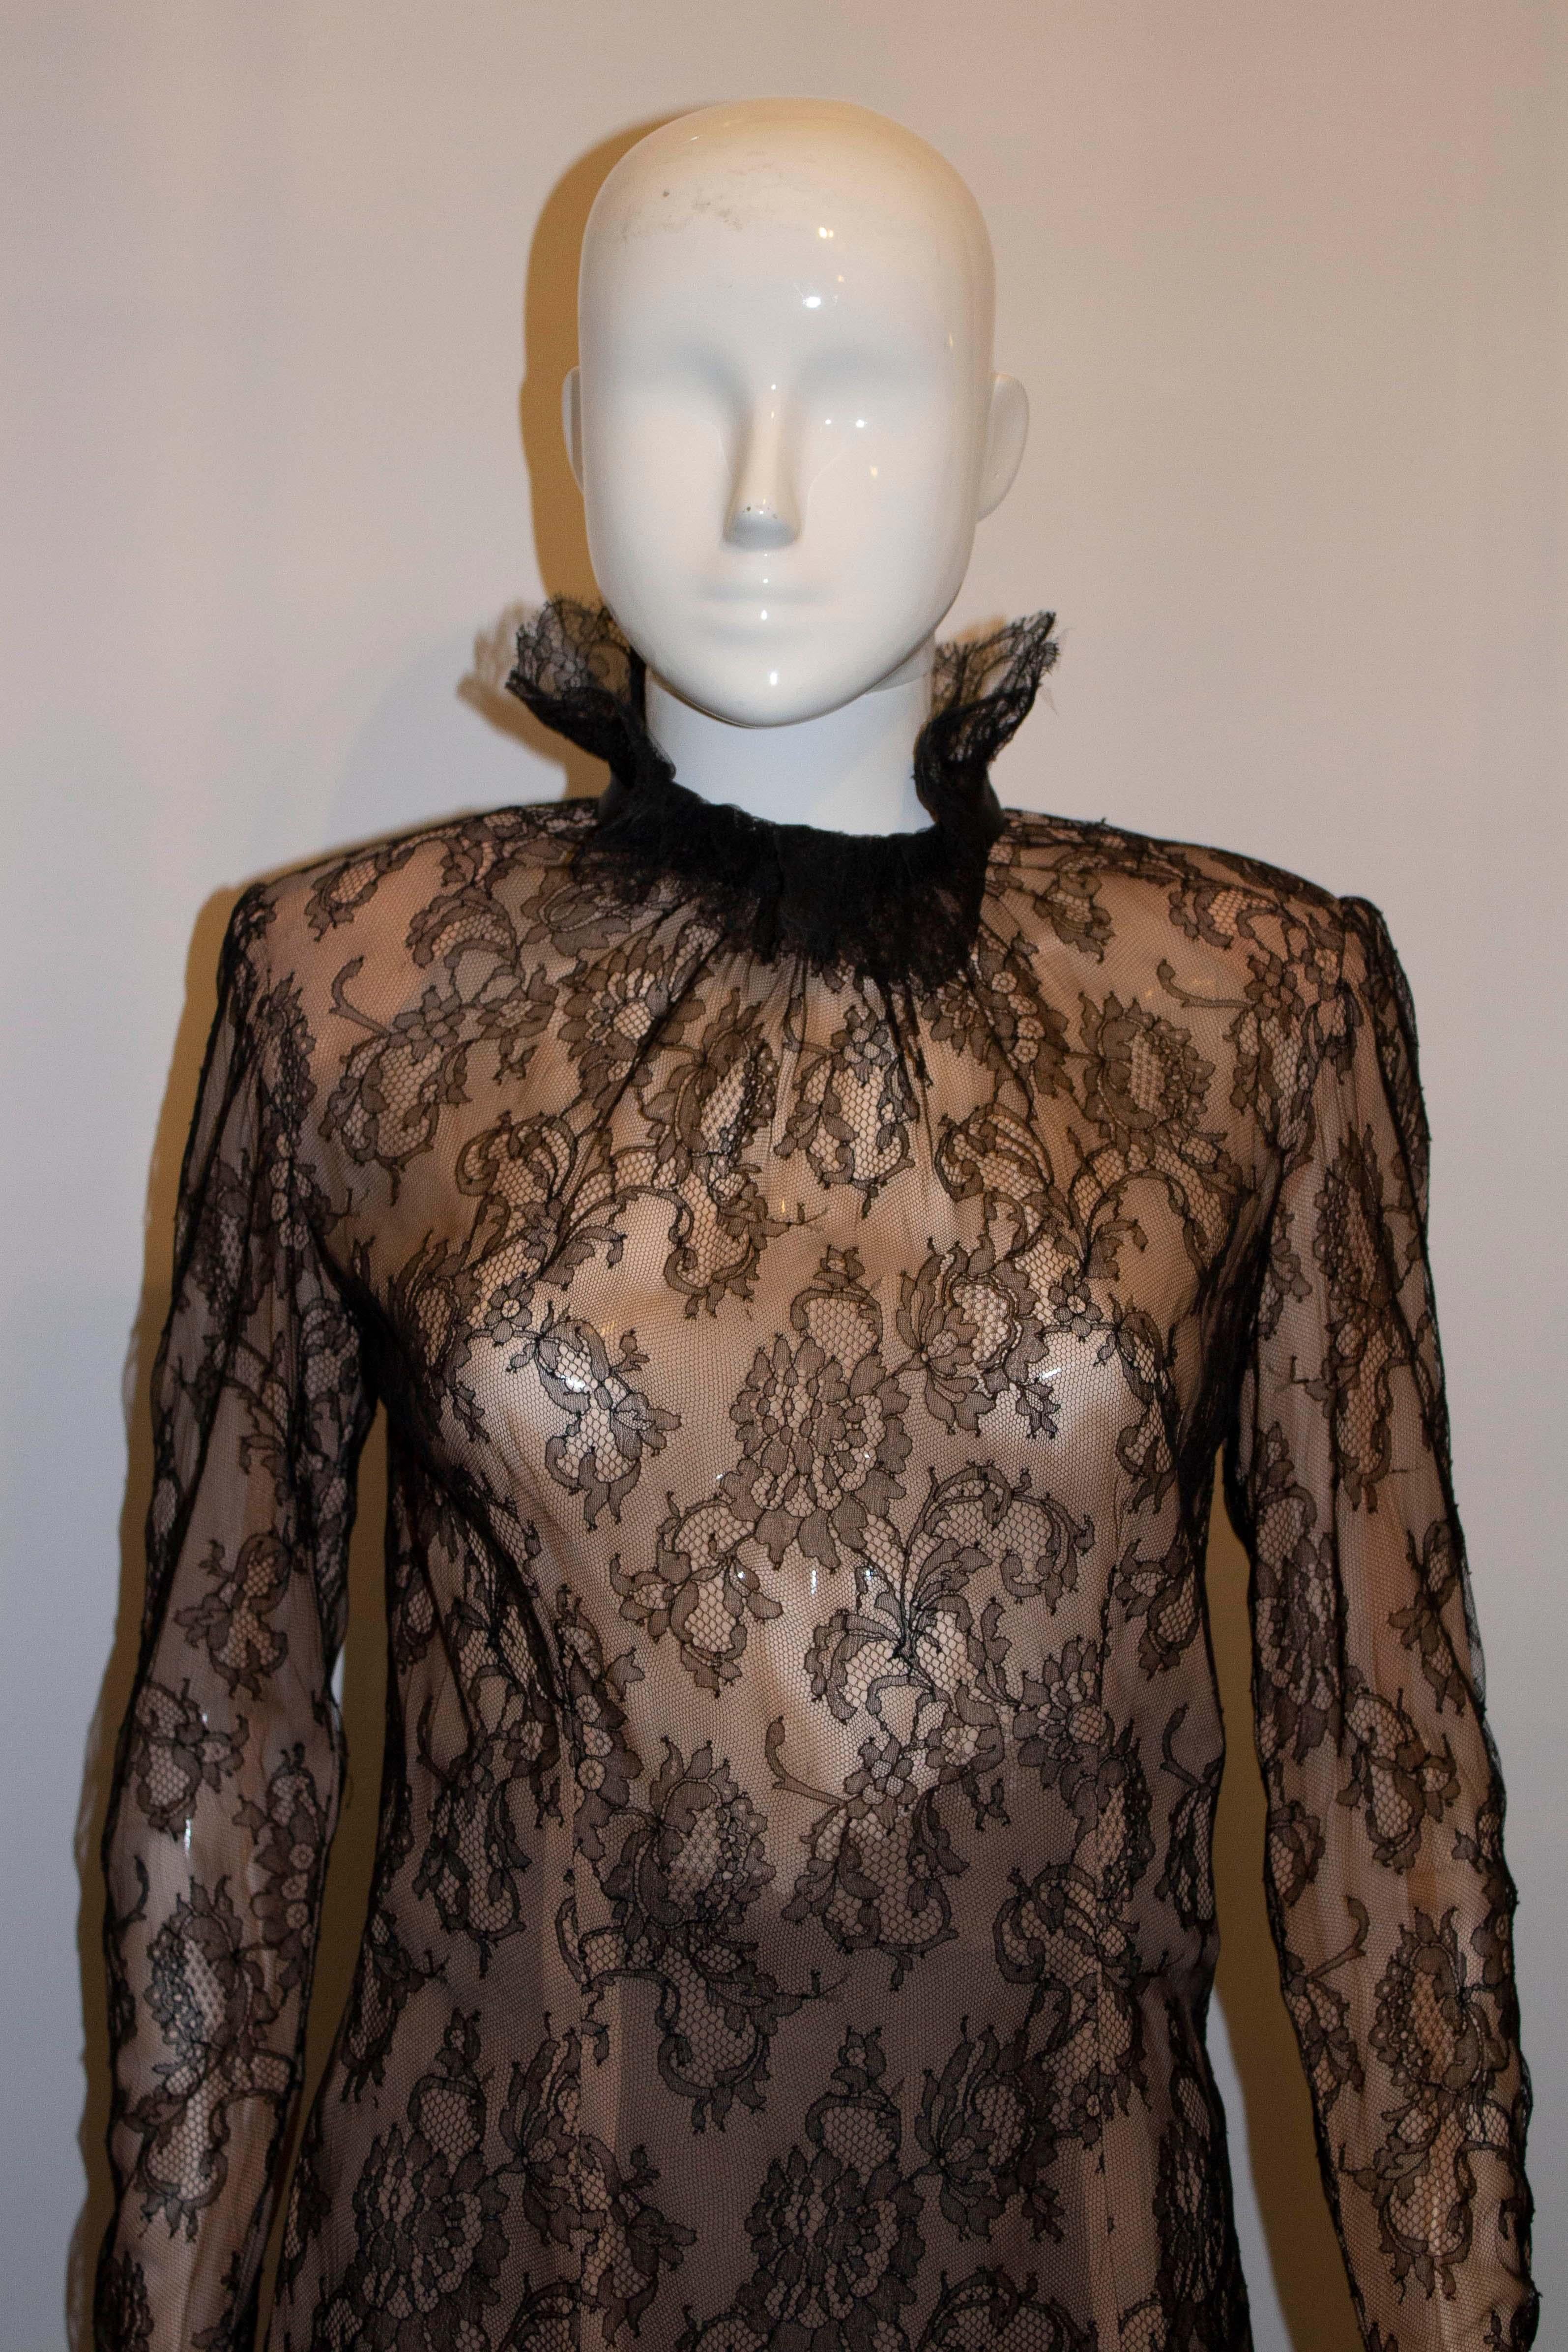 A pretty and chic lace blouse by Nolan Miller Couture. The lace top has a blush/nude lining with frill and ribbon at the neck. It has a back zip opening.
Measurements: Bust 36 '', length 27''